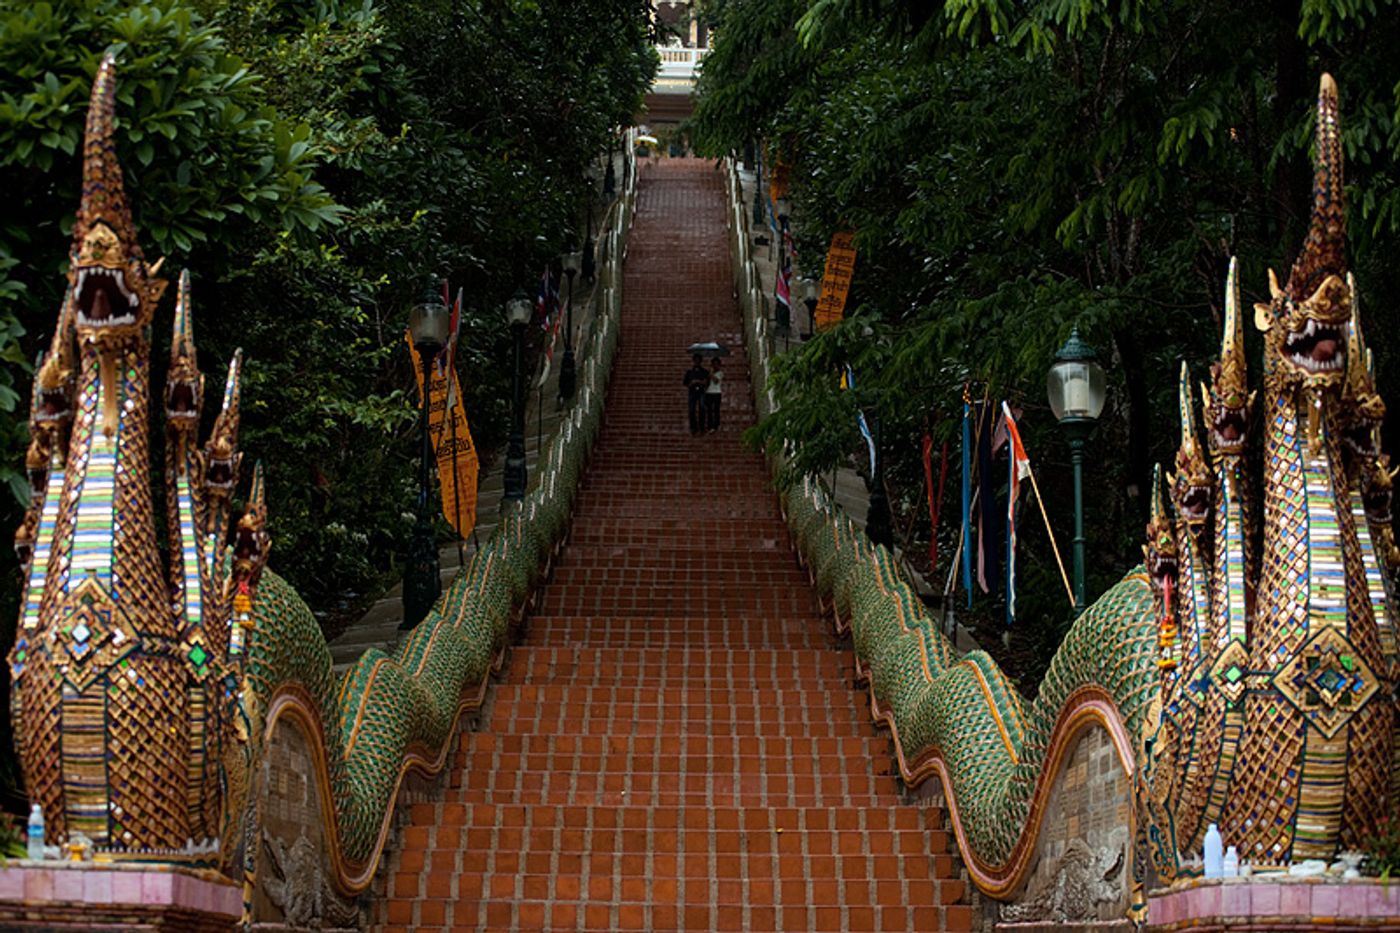 These elaborate steps lead to the entrance of the Doi Suthep Buddhist temple. Photo: Daily Travel Photos